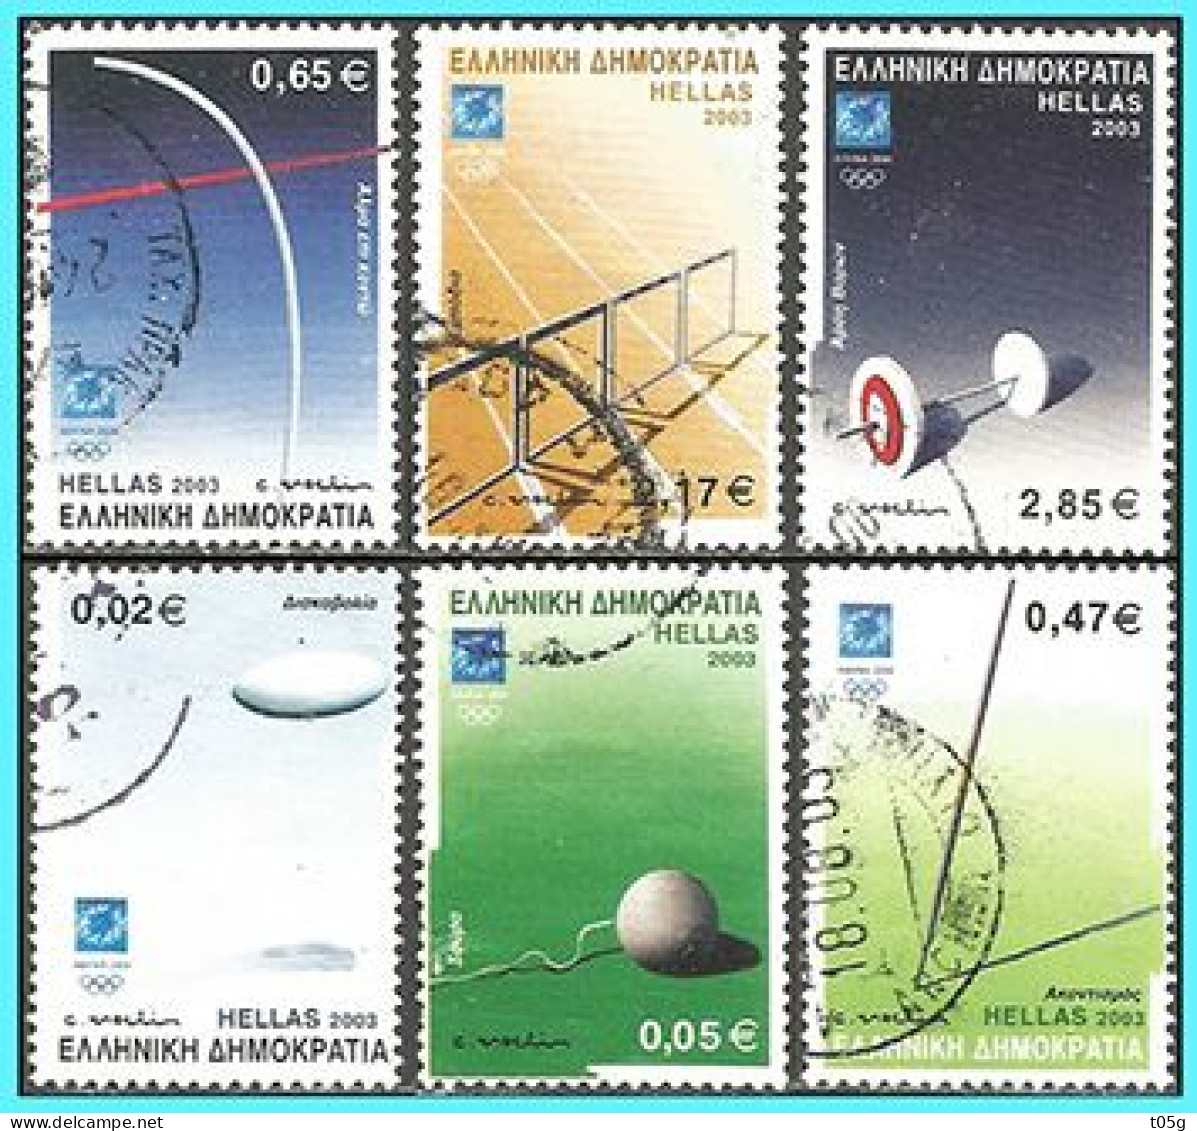 GREECE-GRECE-HELLAS 2003 : "Athens 2004" 7th Issue "sports Equipment" Compl. Set Used - Used Stamps